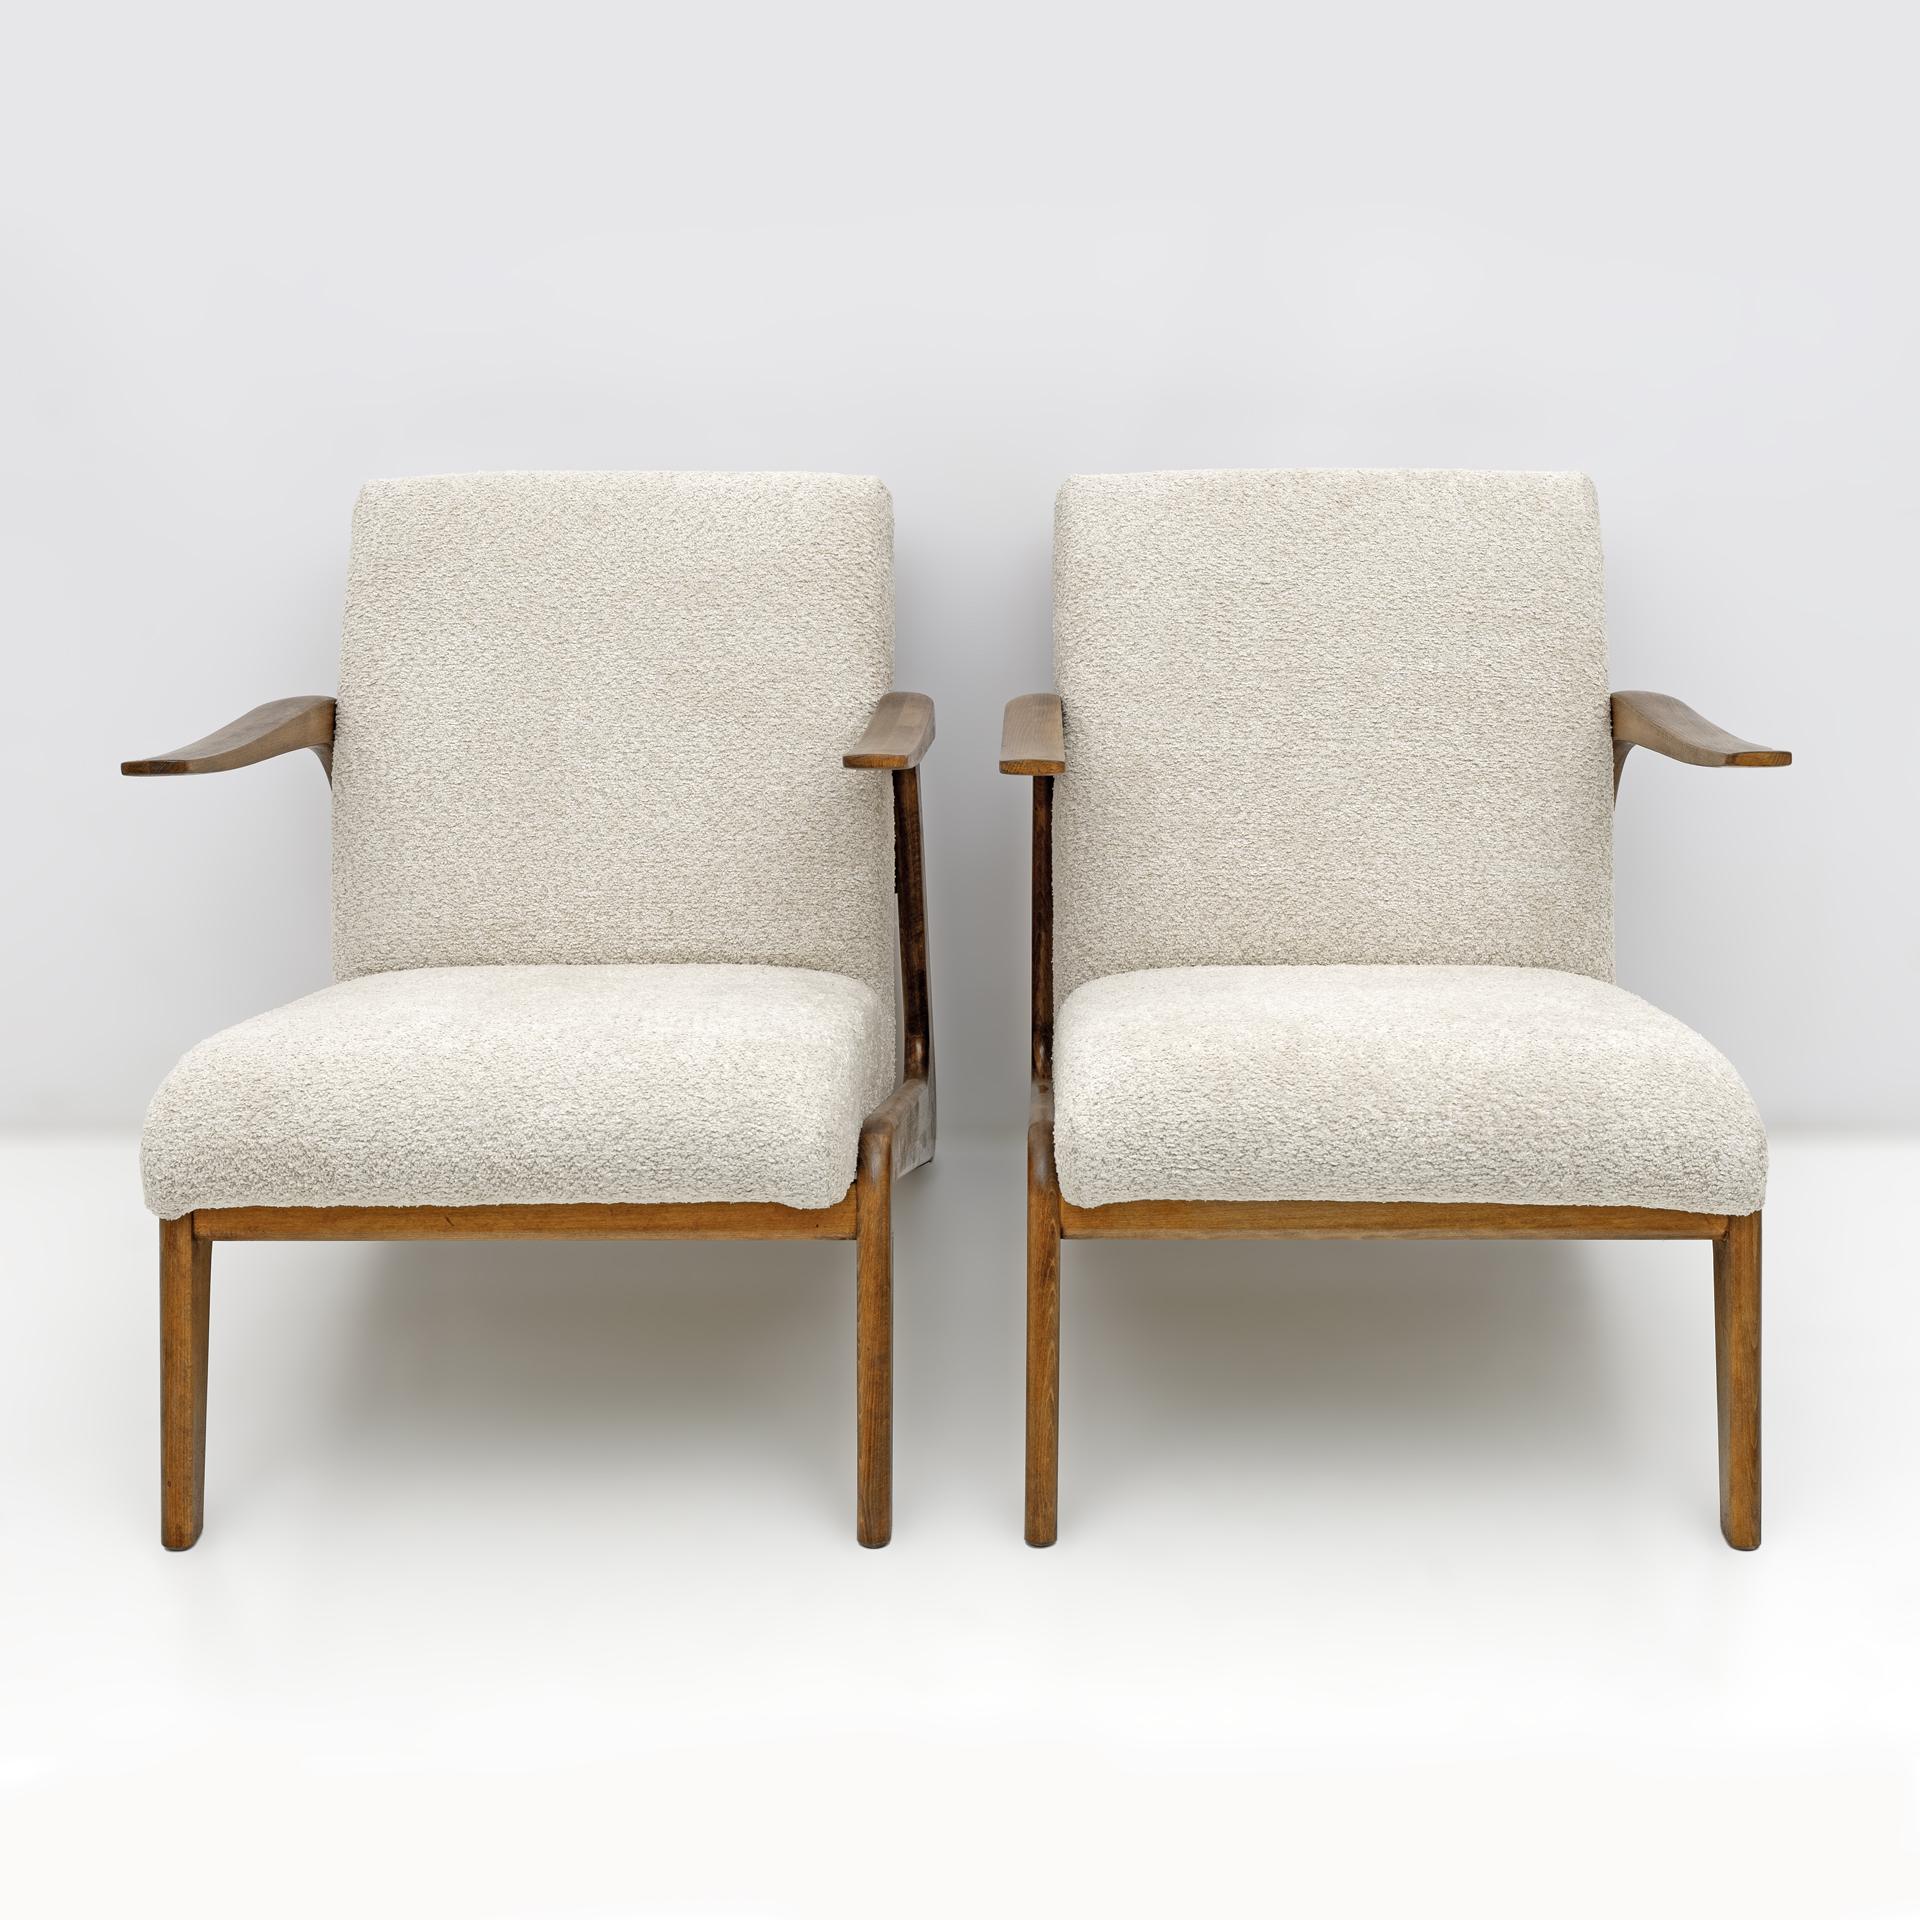 An original and enterprising design for the time, very seductive. The armchairs fascinate those who look at them, comfortably welcoming those who sit on them.

The armchairs have a particular wooden structure that allows you to go down from the